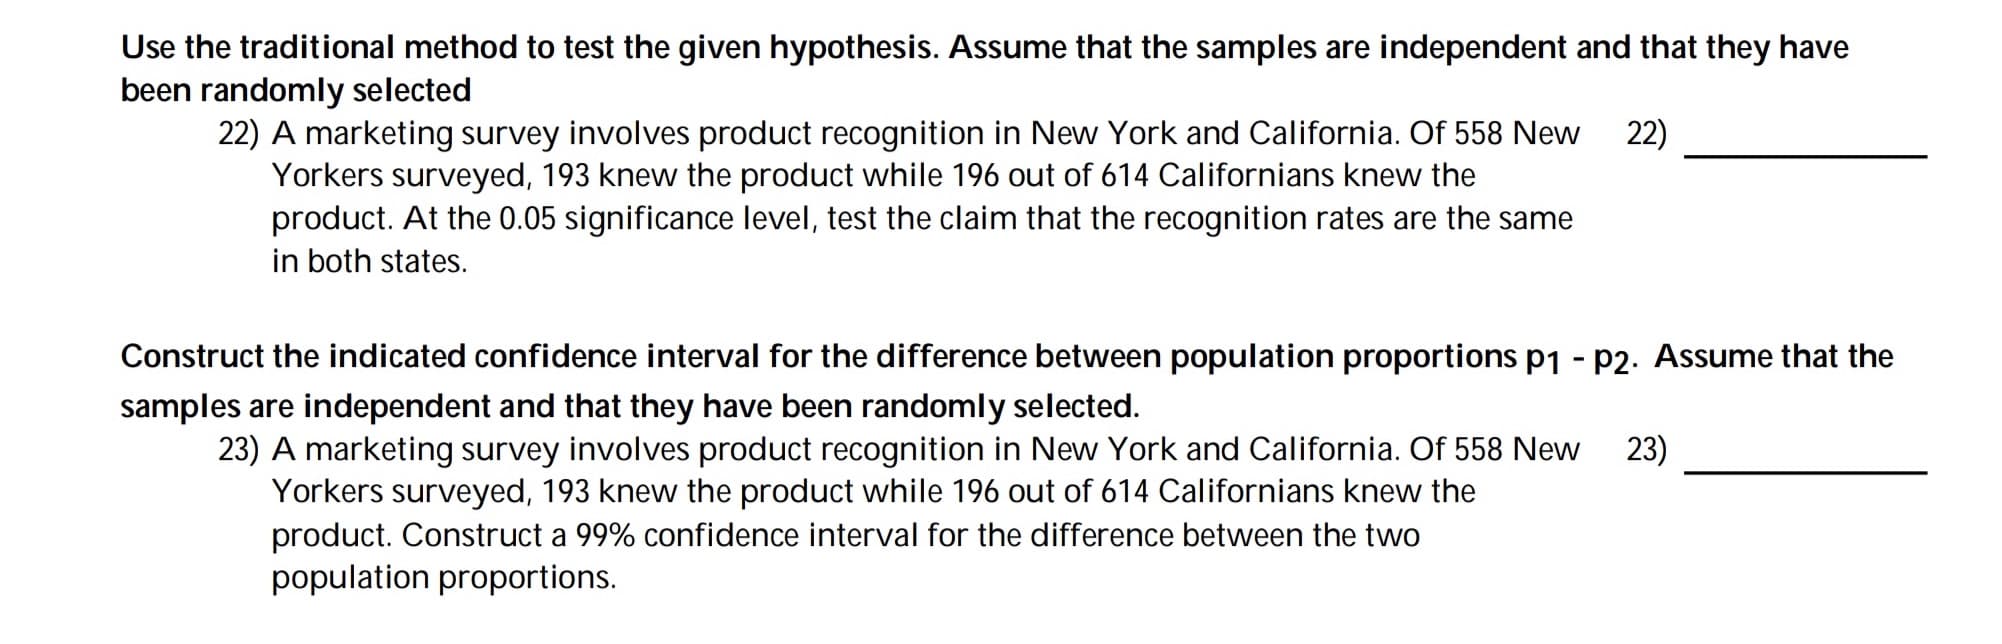 A marketing survey involves product recognition in New York and California. Of 558 New
Yorkers surveyed, 193 knew the product while 196 out of 614 Californians knew the
product. At the 0.05 significance level, test the claim that the recognition rates are the same
in both states.
